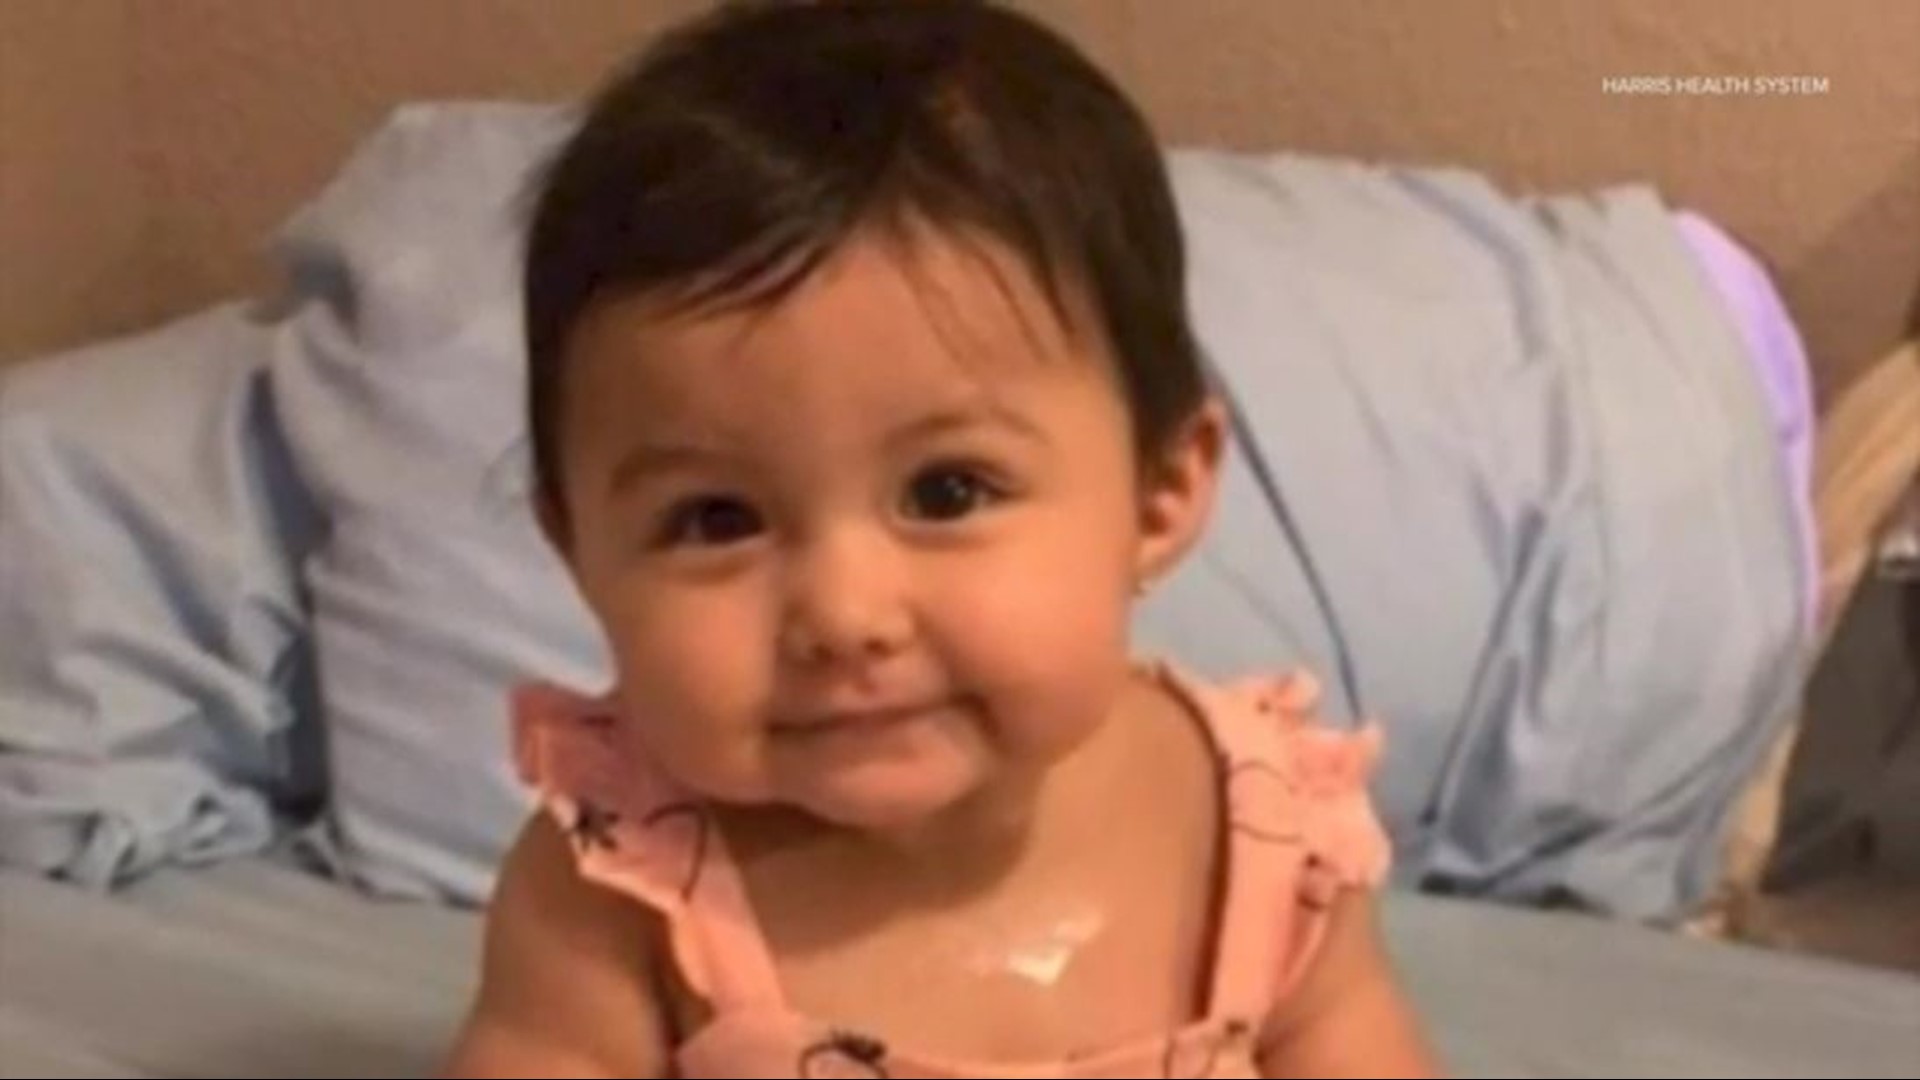 An 11-month-old girl with COVID was transferred to Central Texas from Houston Thursday because there were no appropriate pediatric beds available.